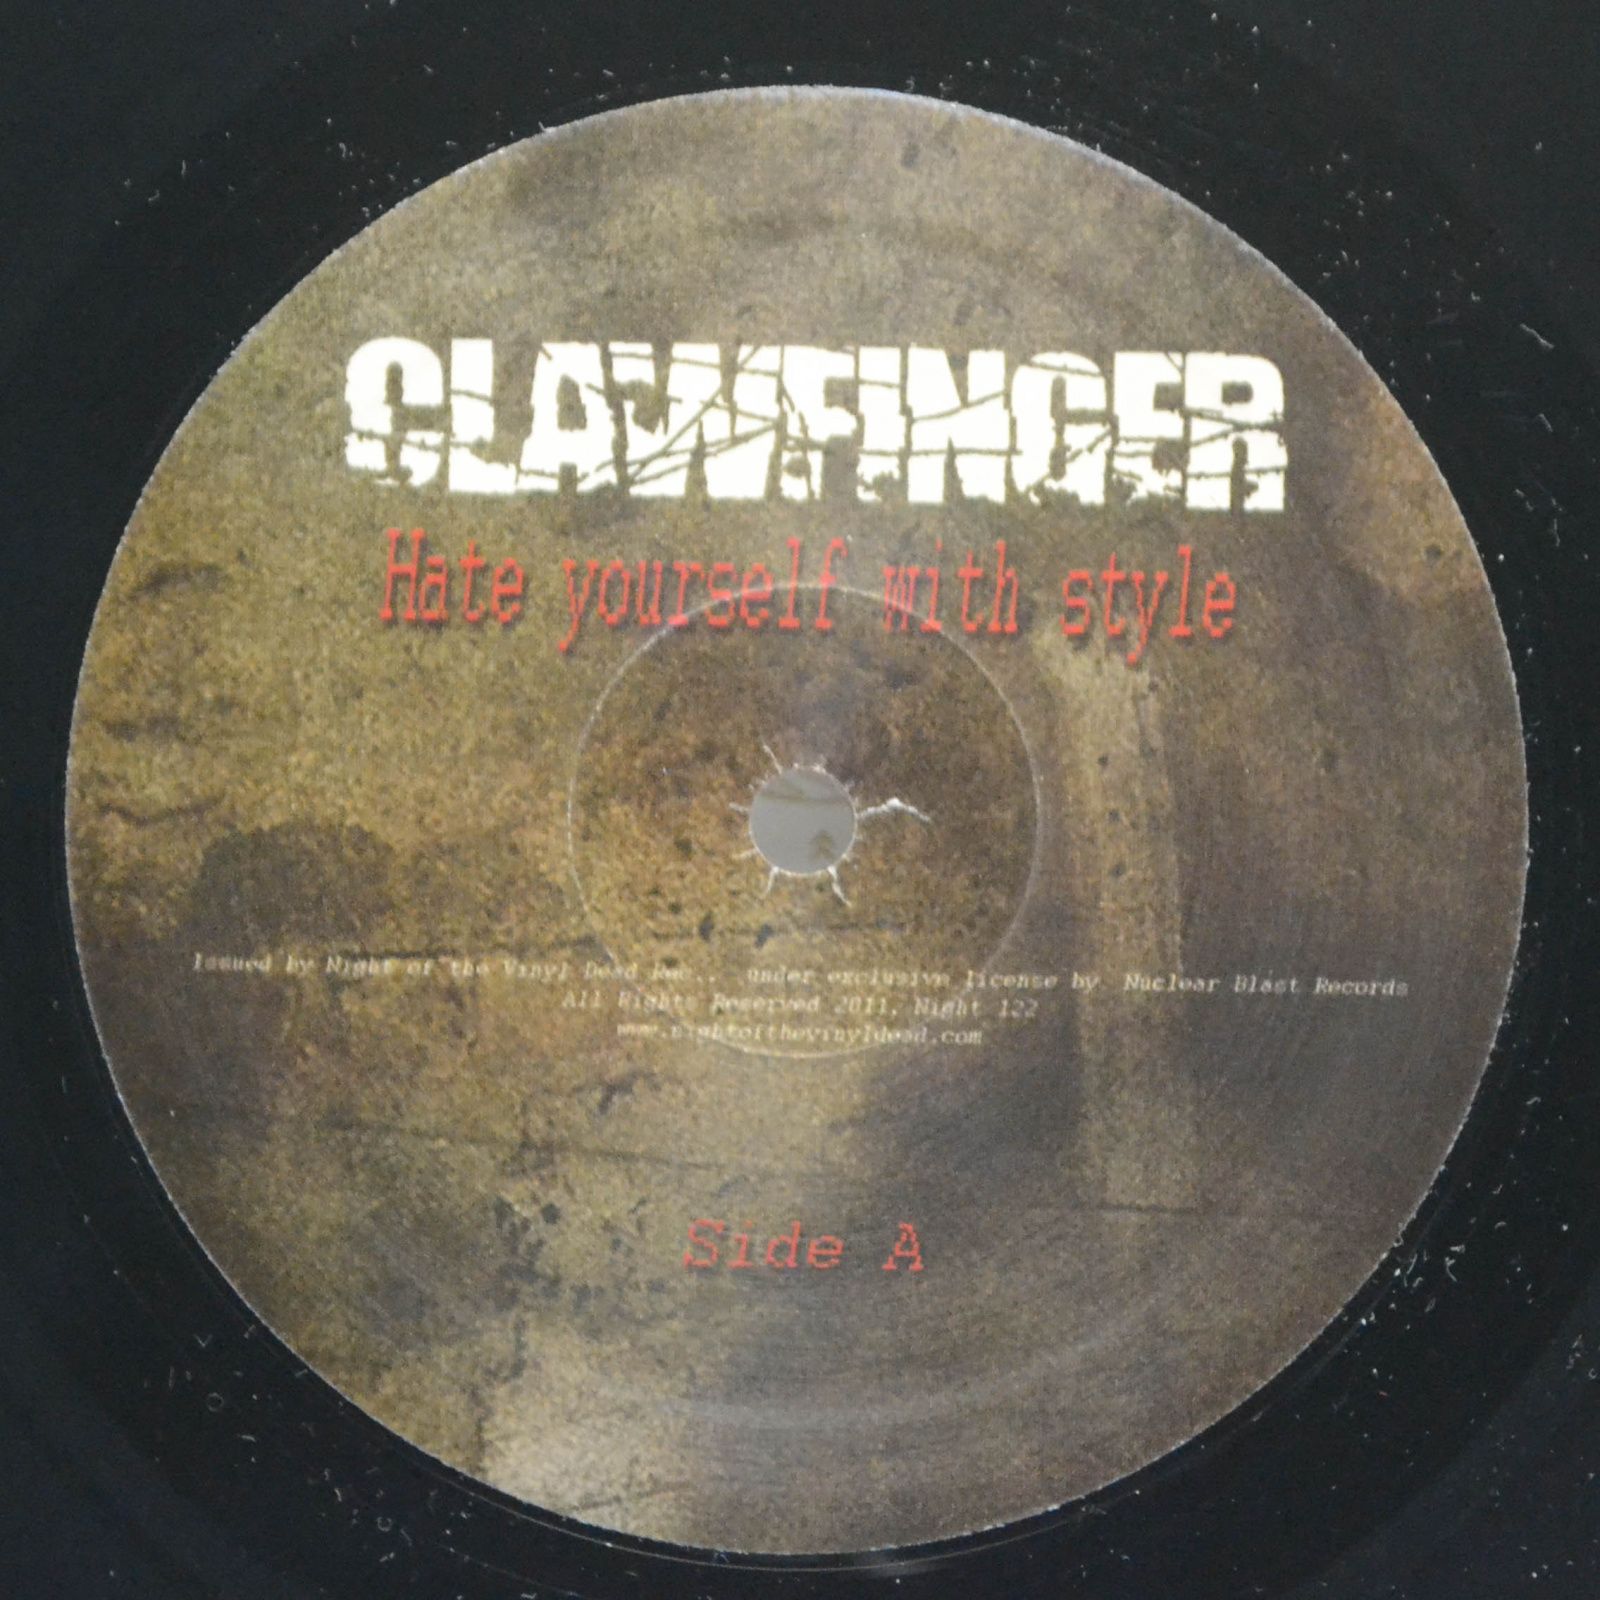 Clawfinger — Hate Yourself With Style (2LP), 2011